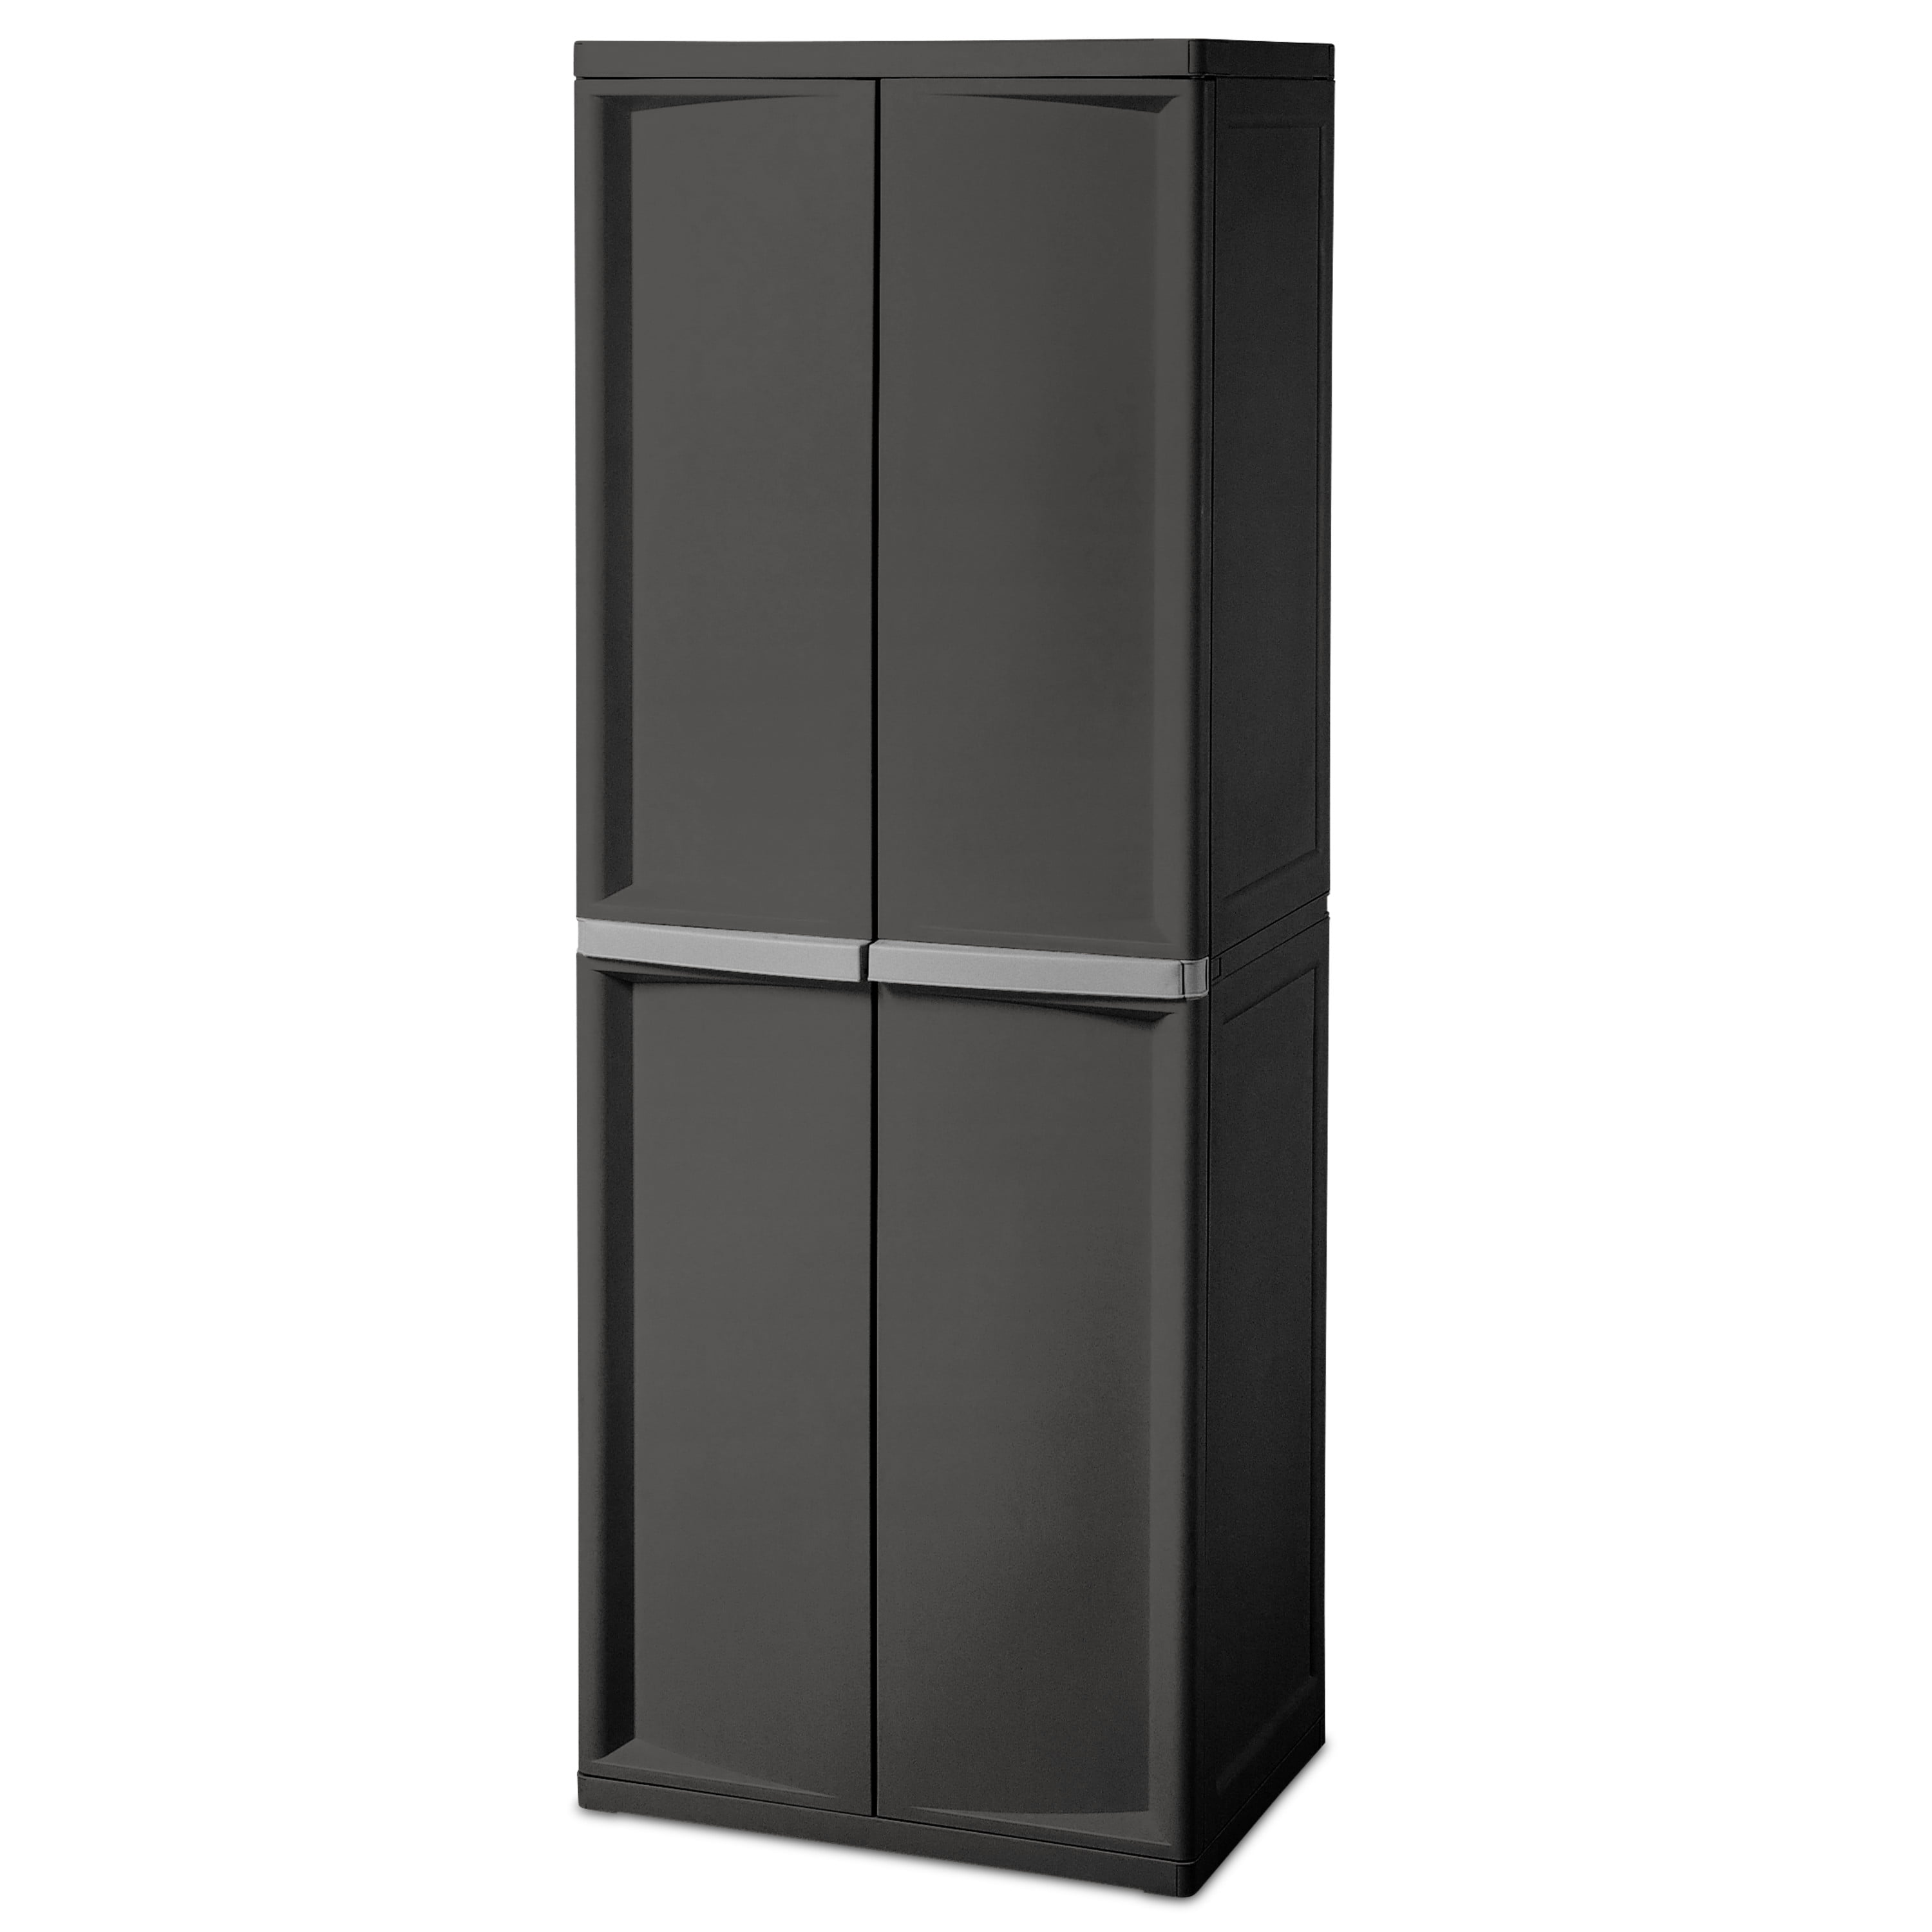 Sterilite 4 Shelf Cabinet Flat Gray, Sterilite Storage Cabinets With Doors And Shelves